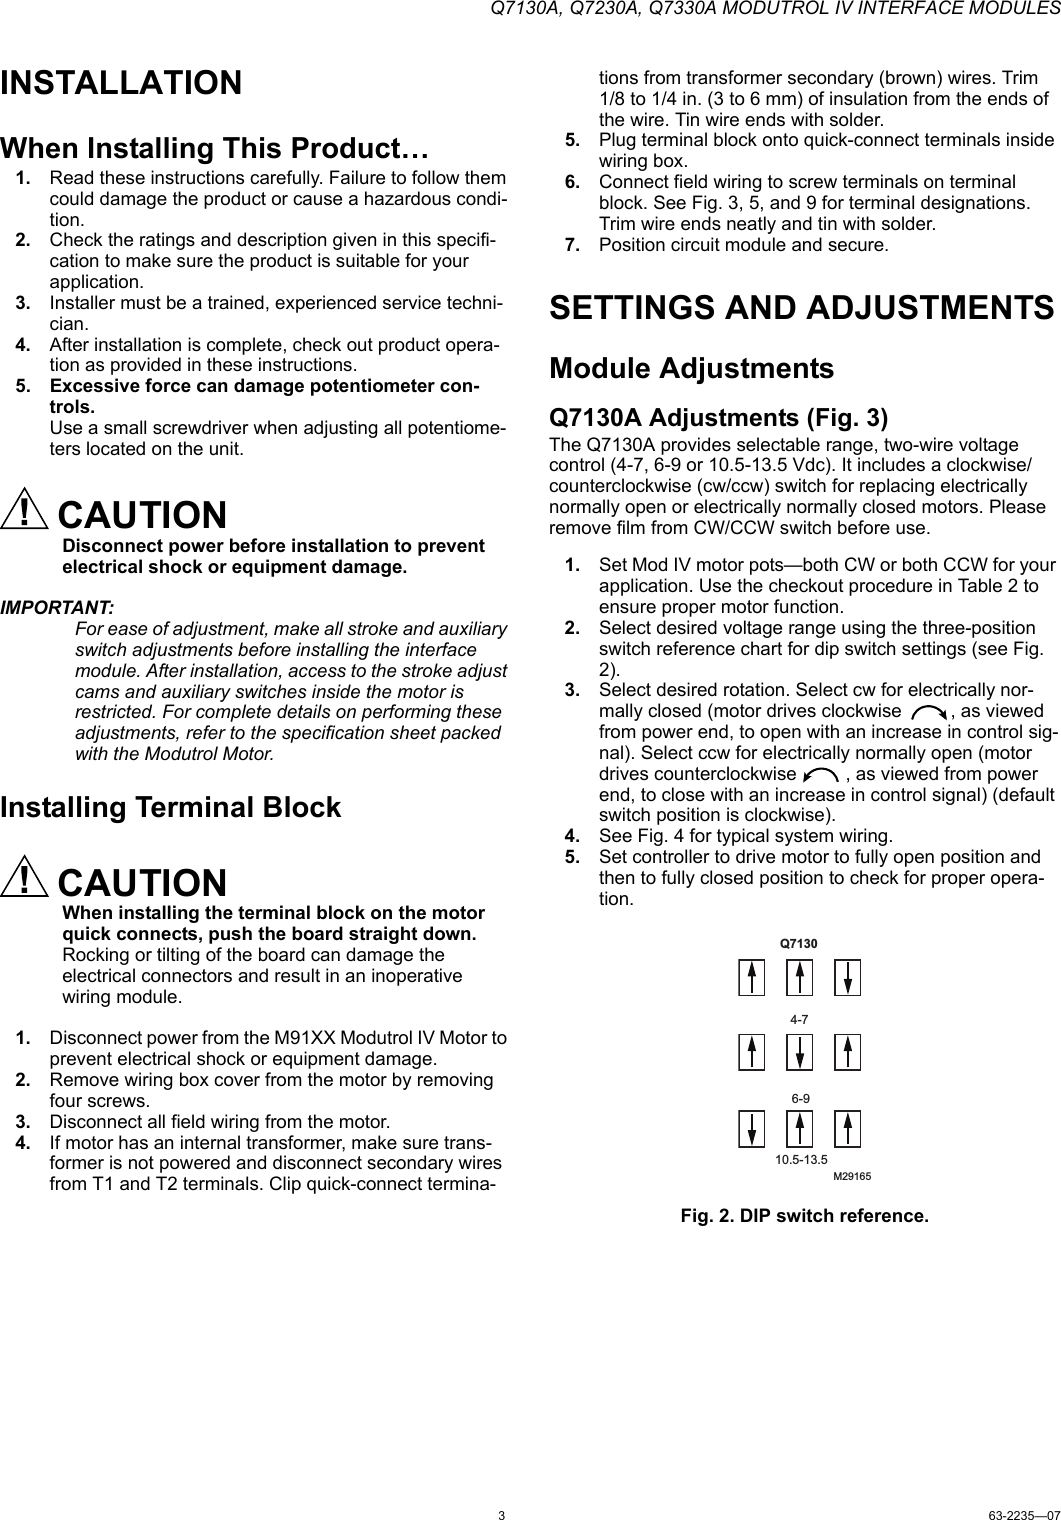 Page 3 of 8 - 63-2235_D Q7130A, Q7230A, Q7330AModutrol IV Interface Modules  Installation Directions